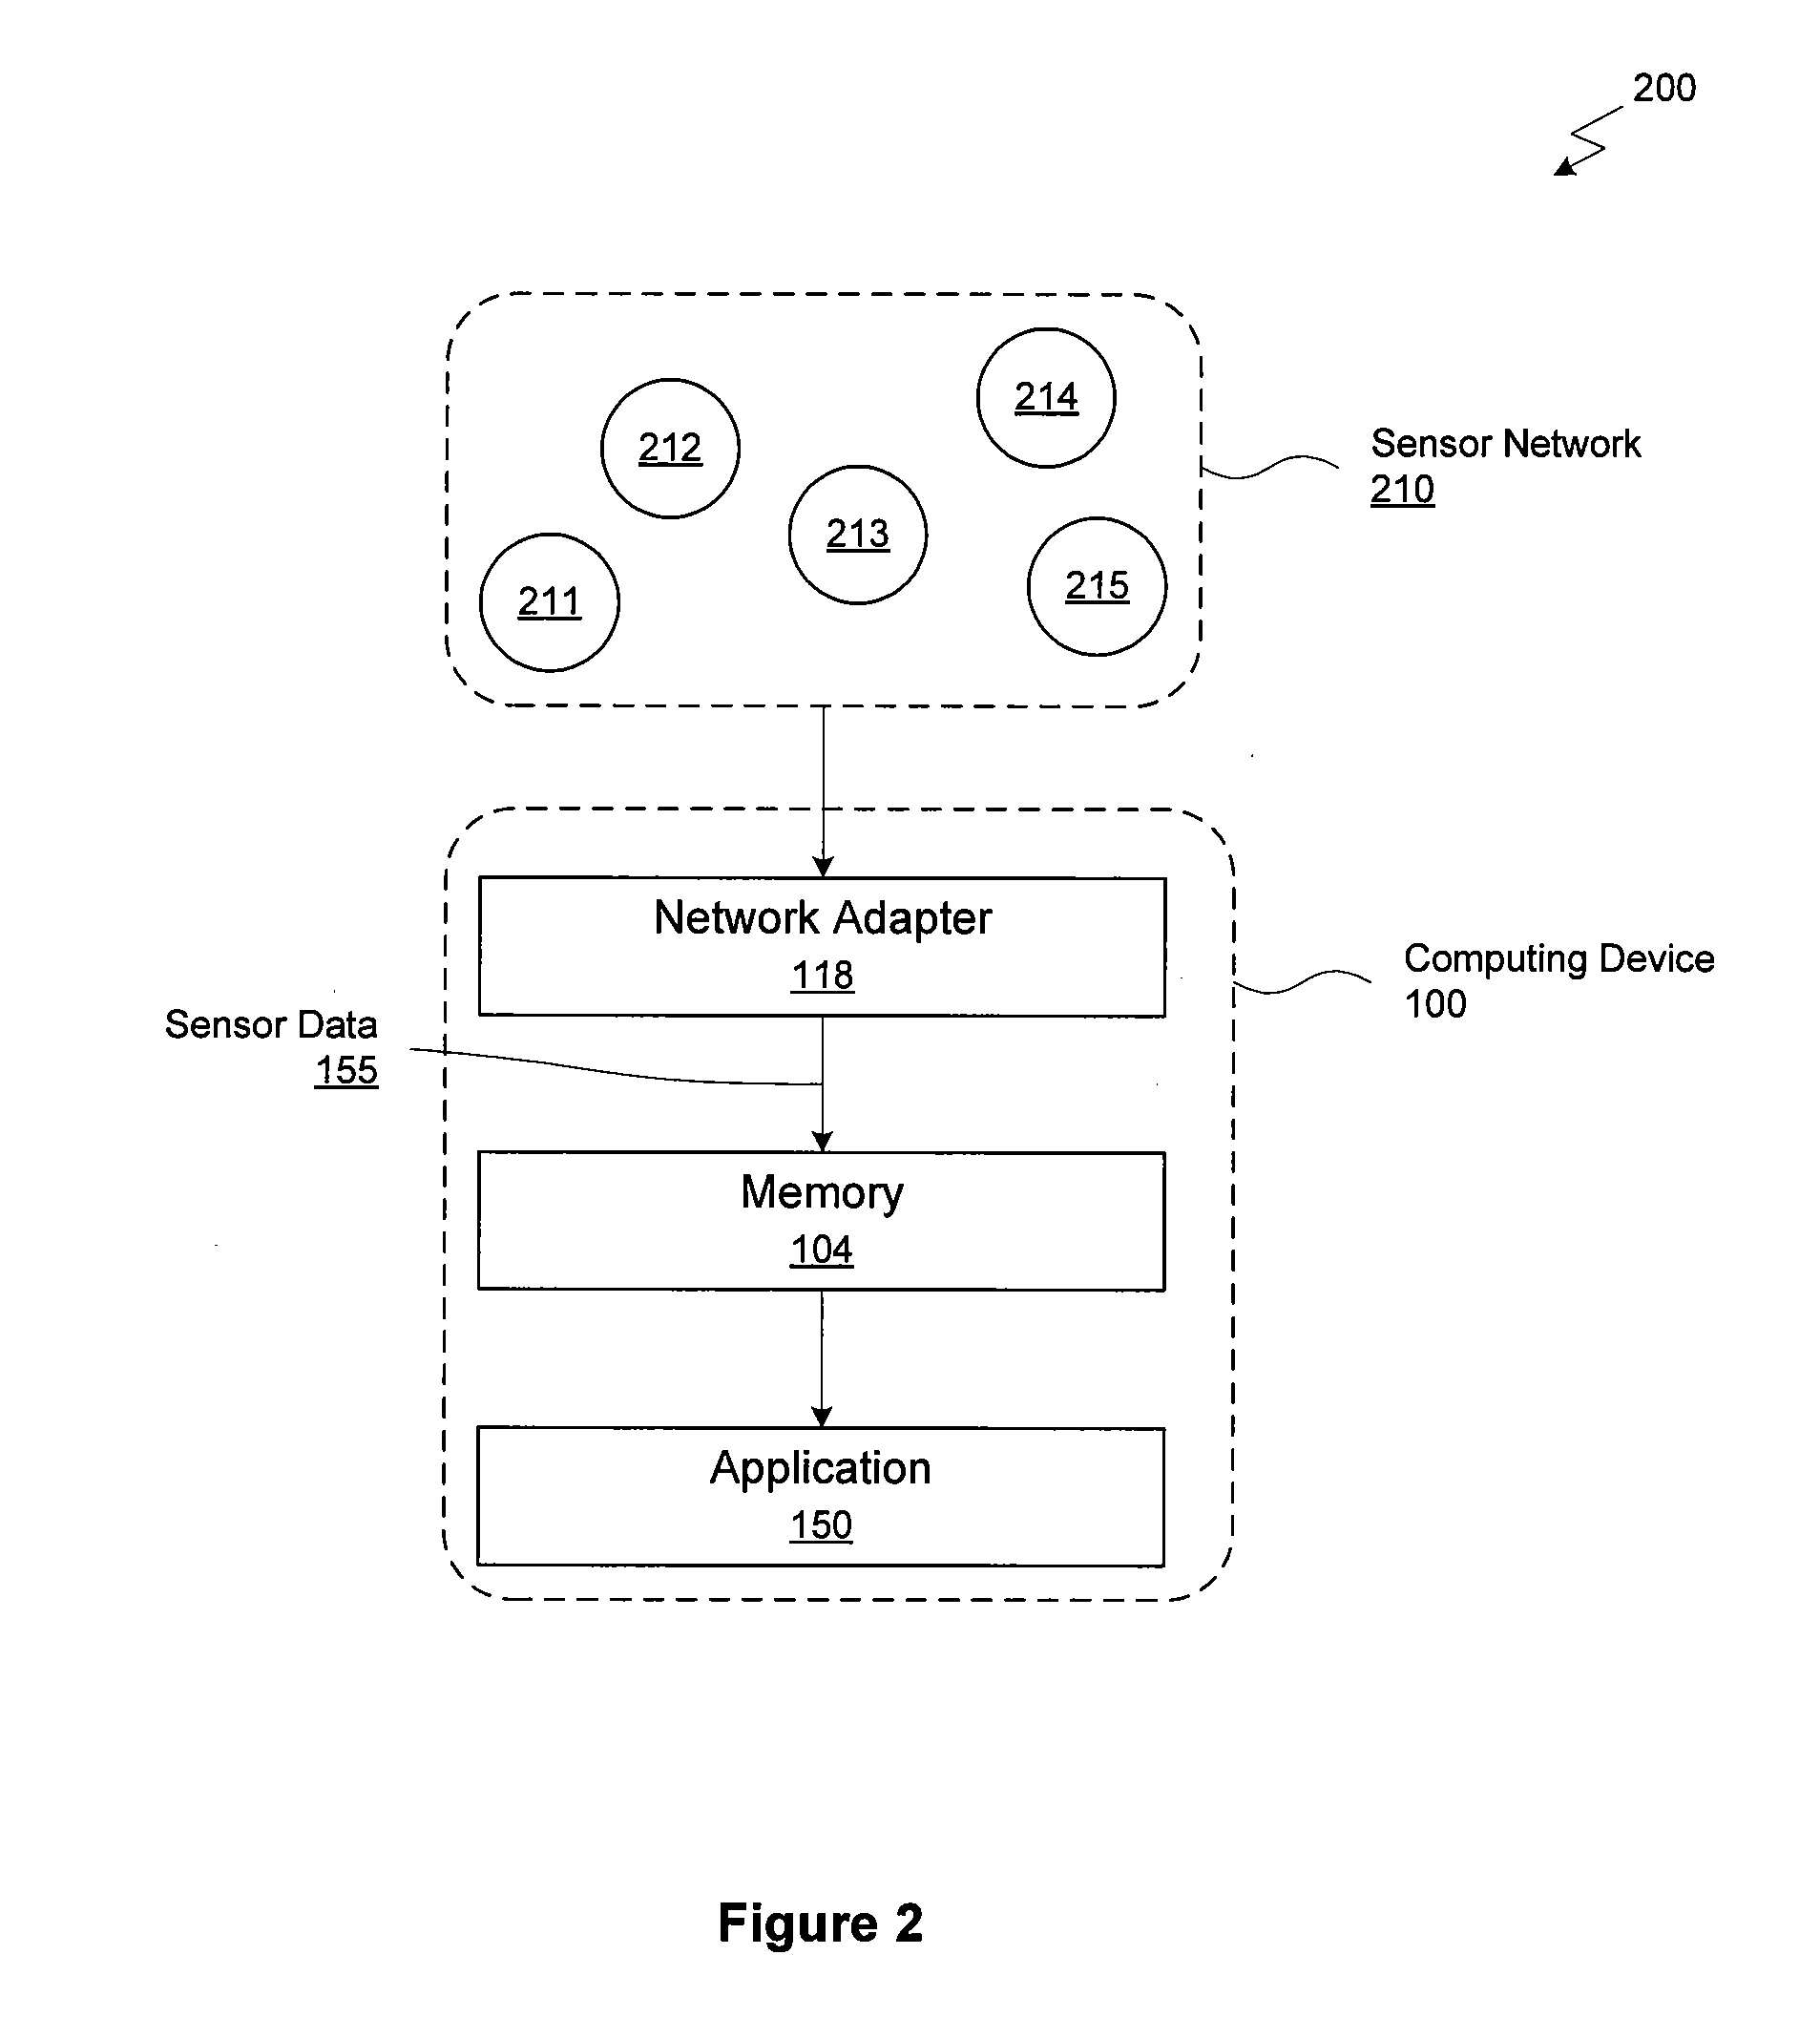 Systems and methods for augmenting panoramic image data with performance related data for a building